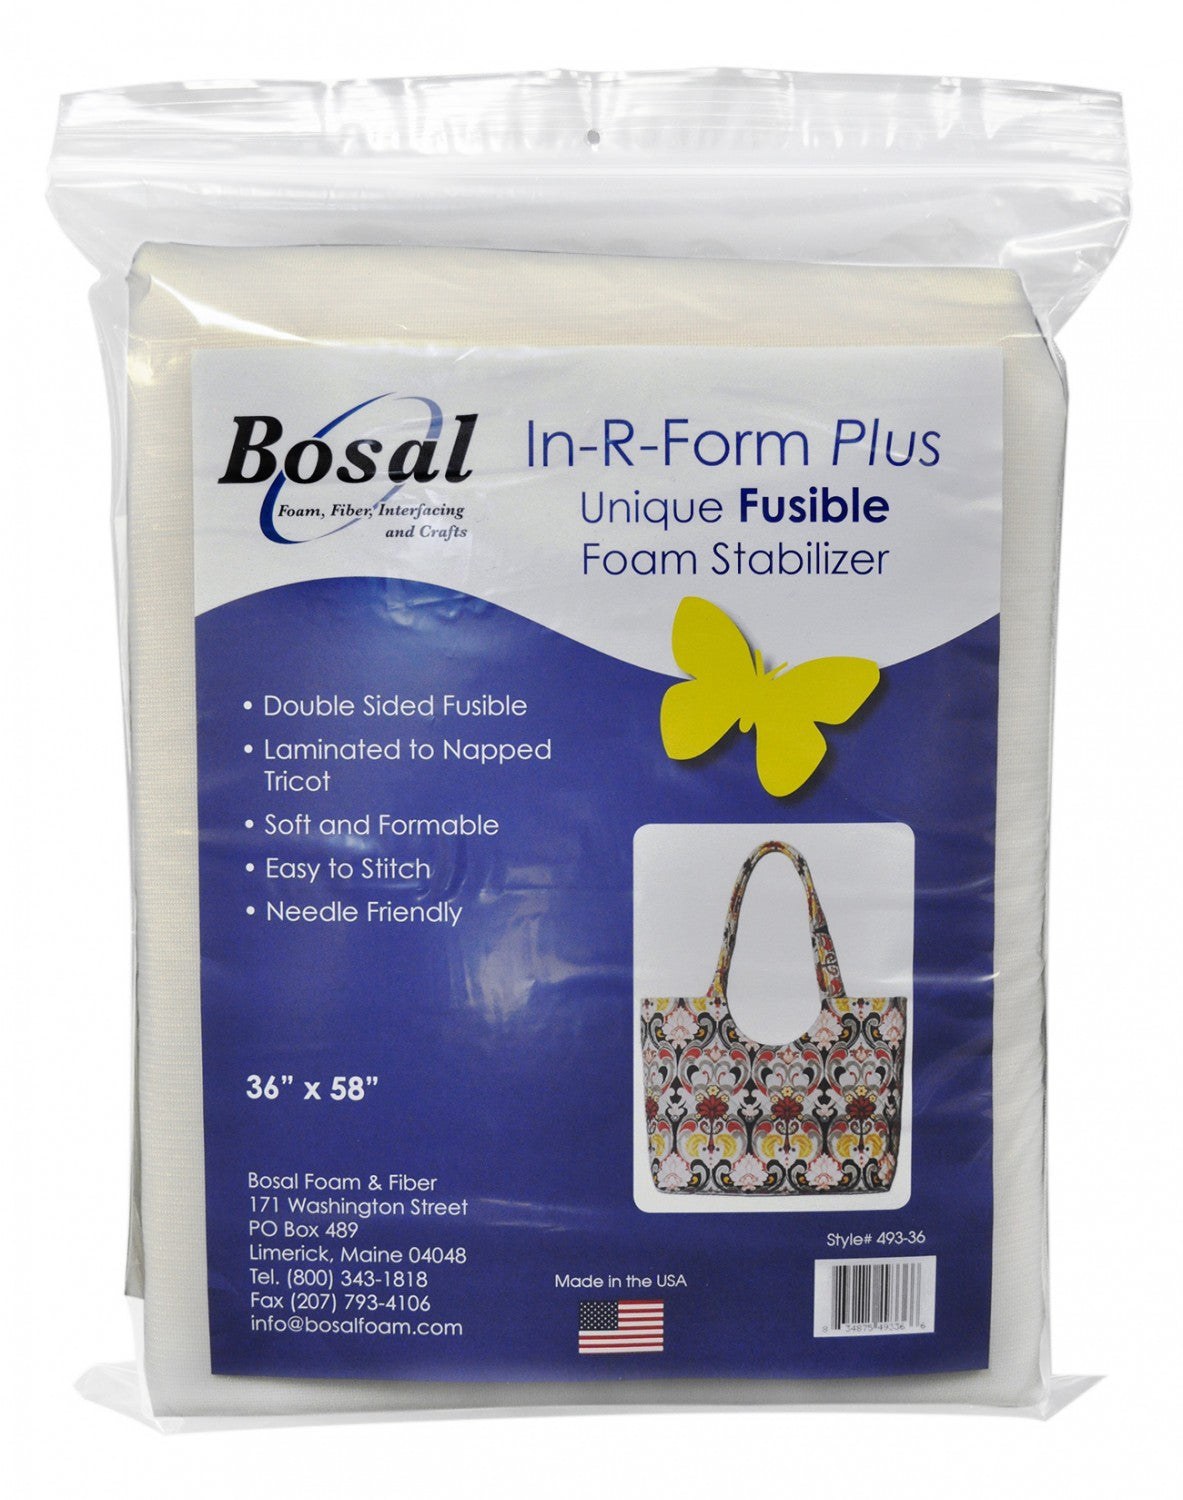 In-R-Form Plus Double-Sided Fusible Batting 58-Inches x 36-Inches by Bosal Foam and Fiber